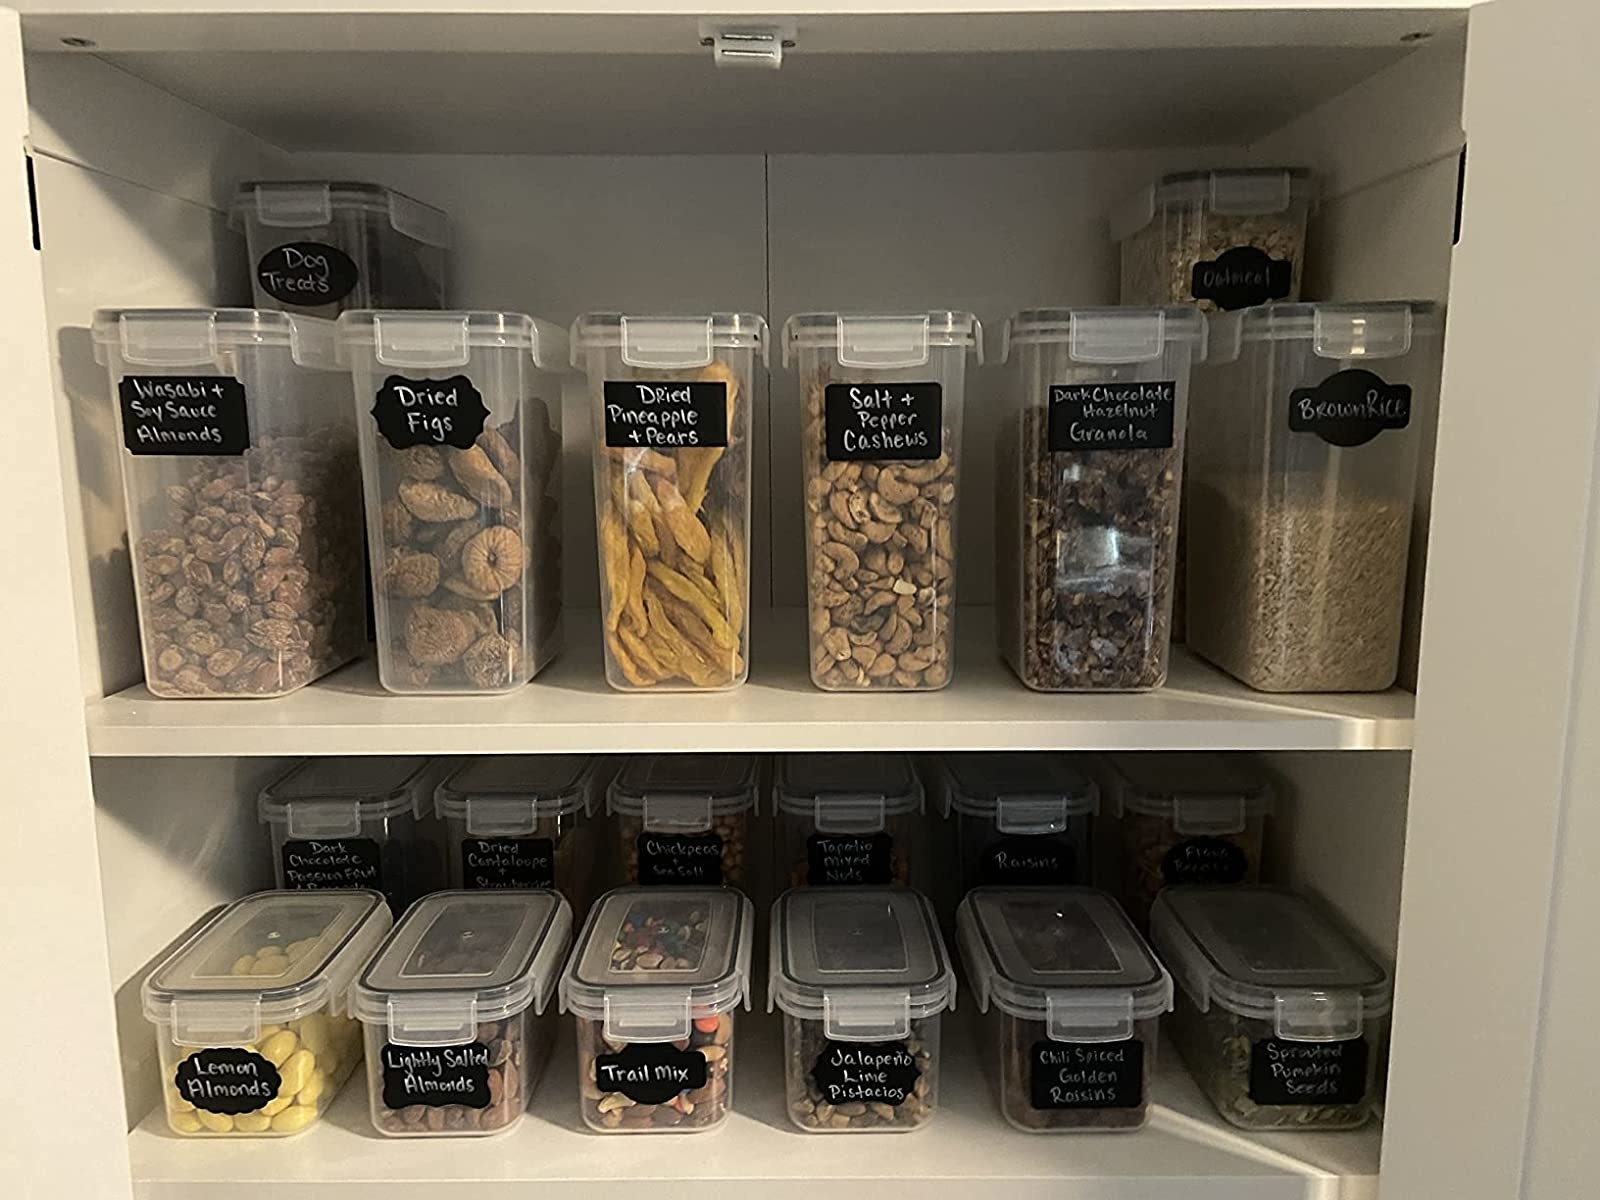 The reviewer shows the containers in use in the pantry